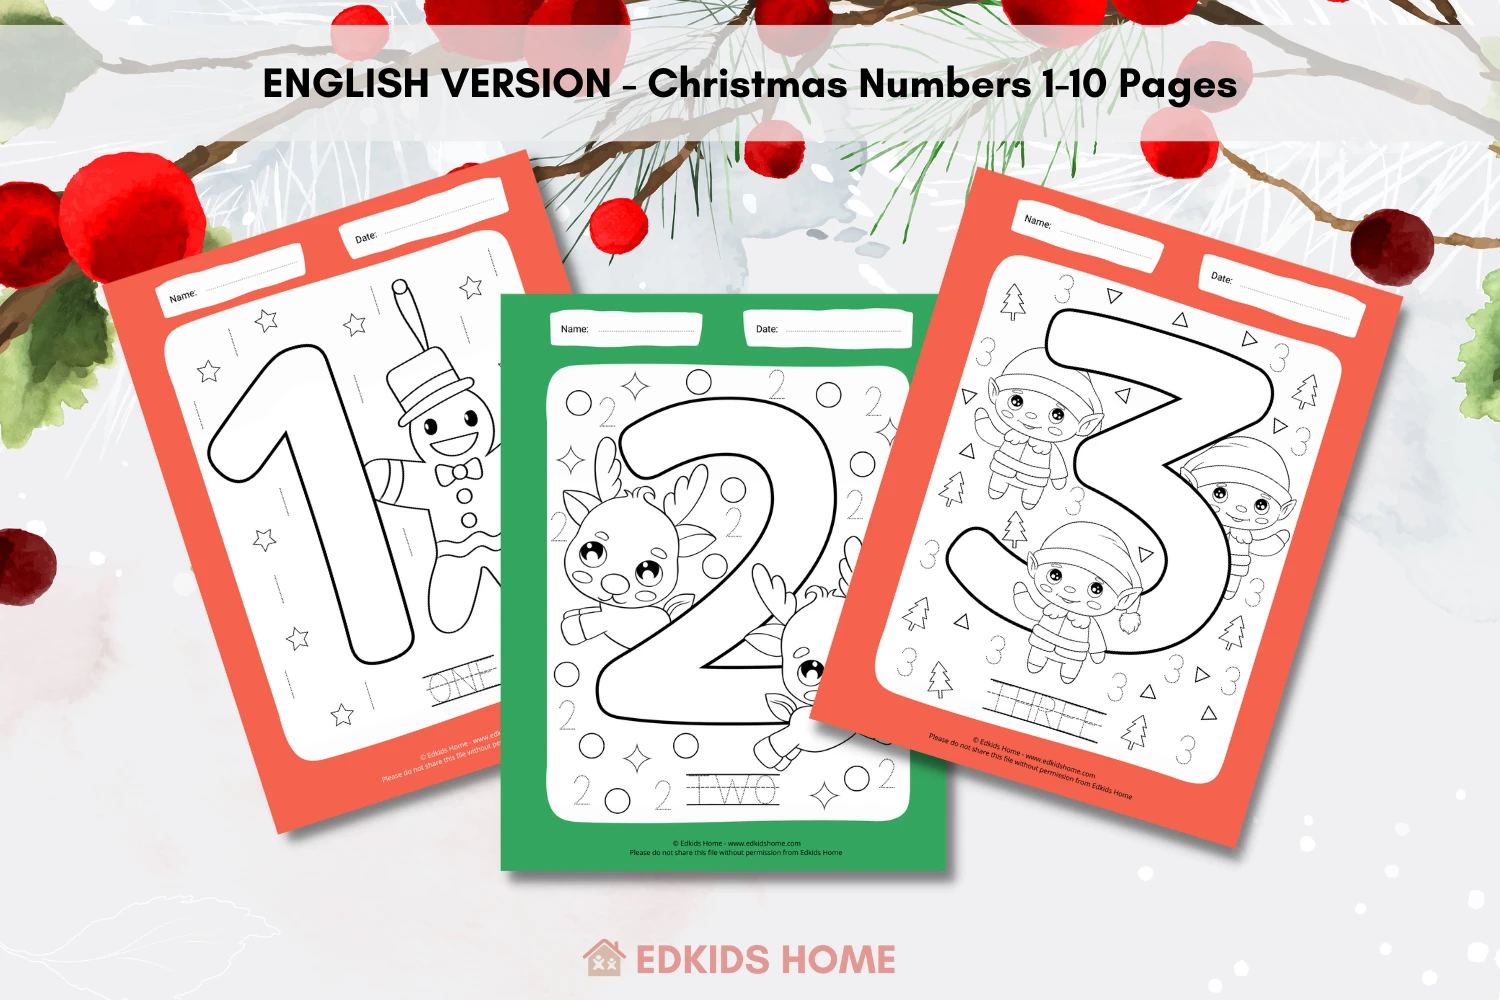 English - Free Christmas Numbers 1-10 Worksheets